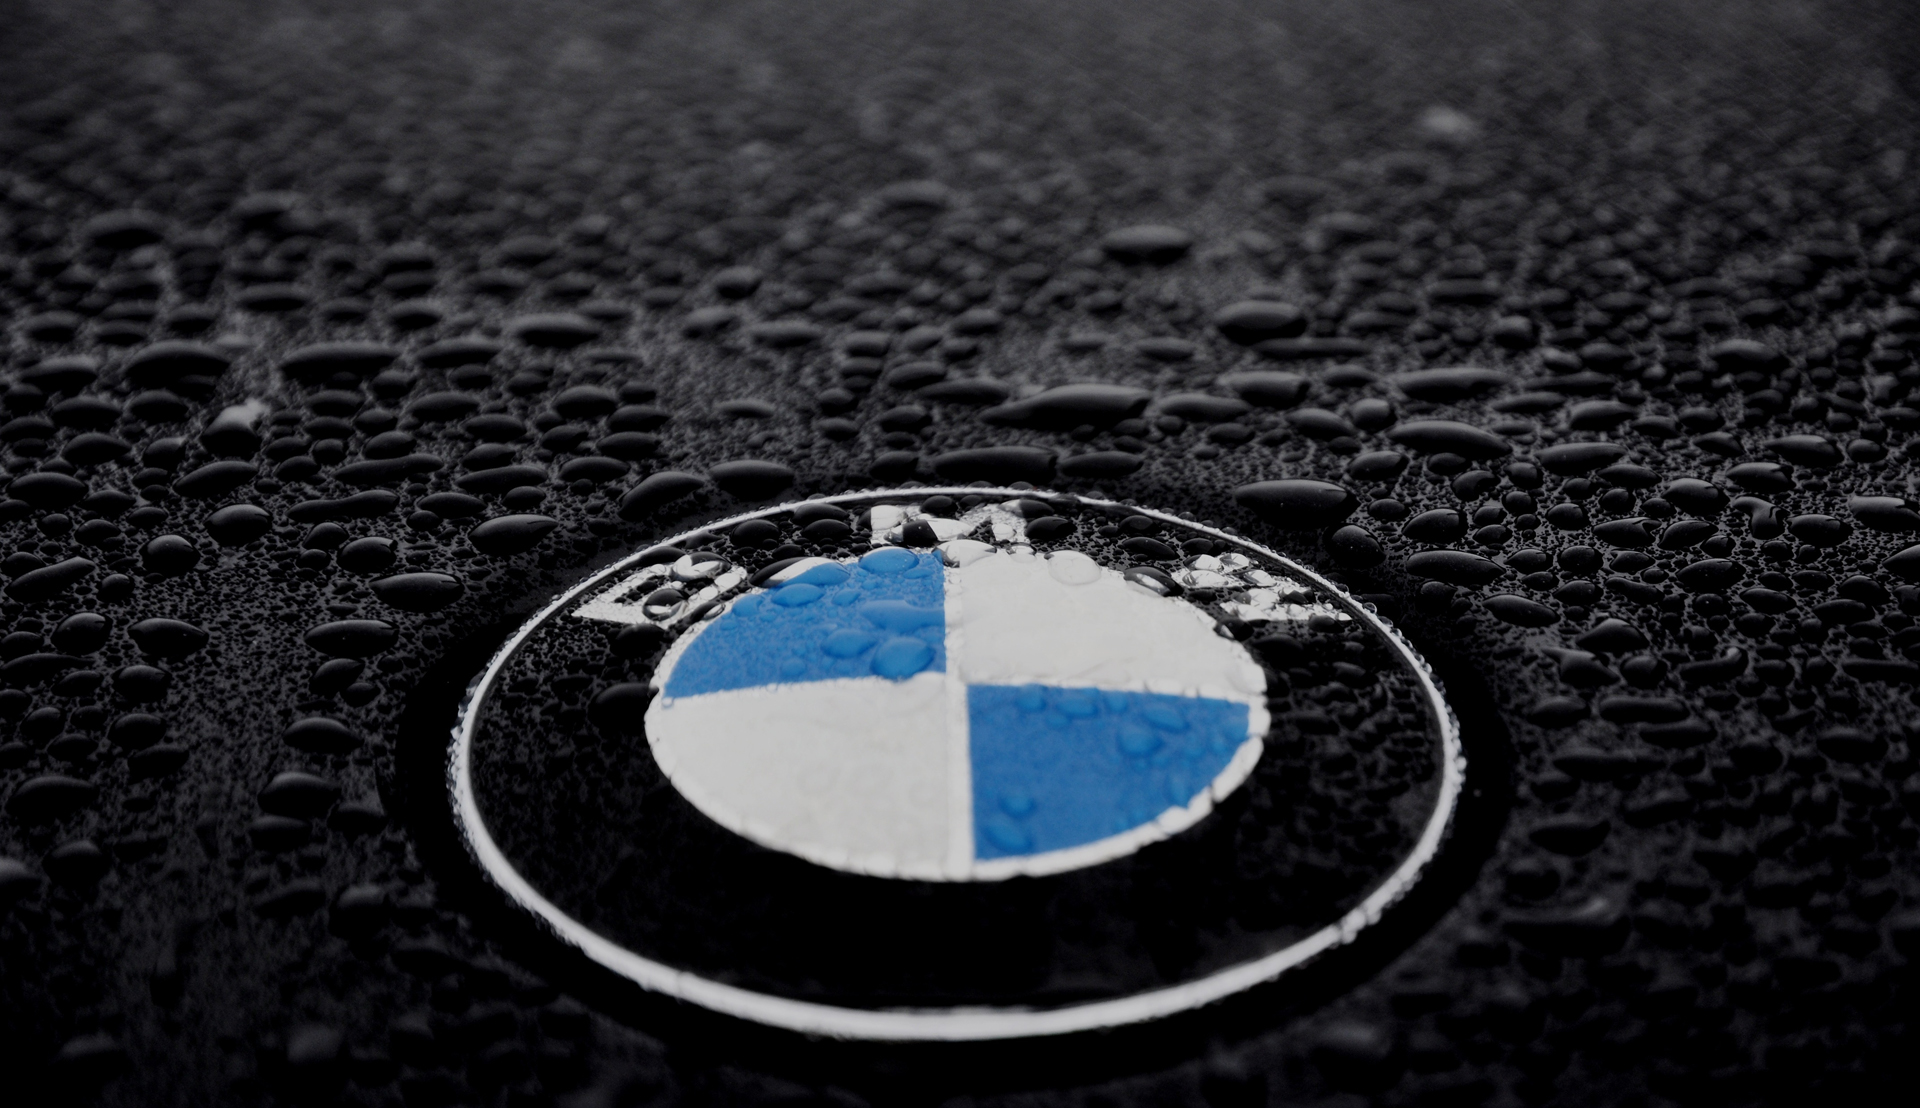 Bmw Logo Wallpaper Pictures Image